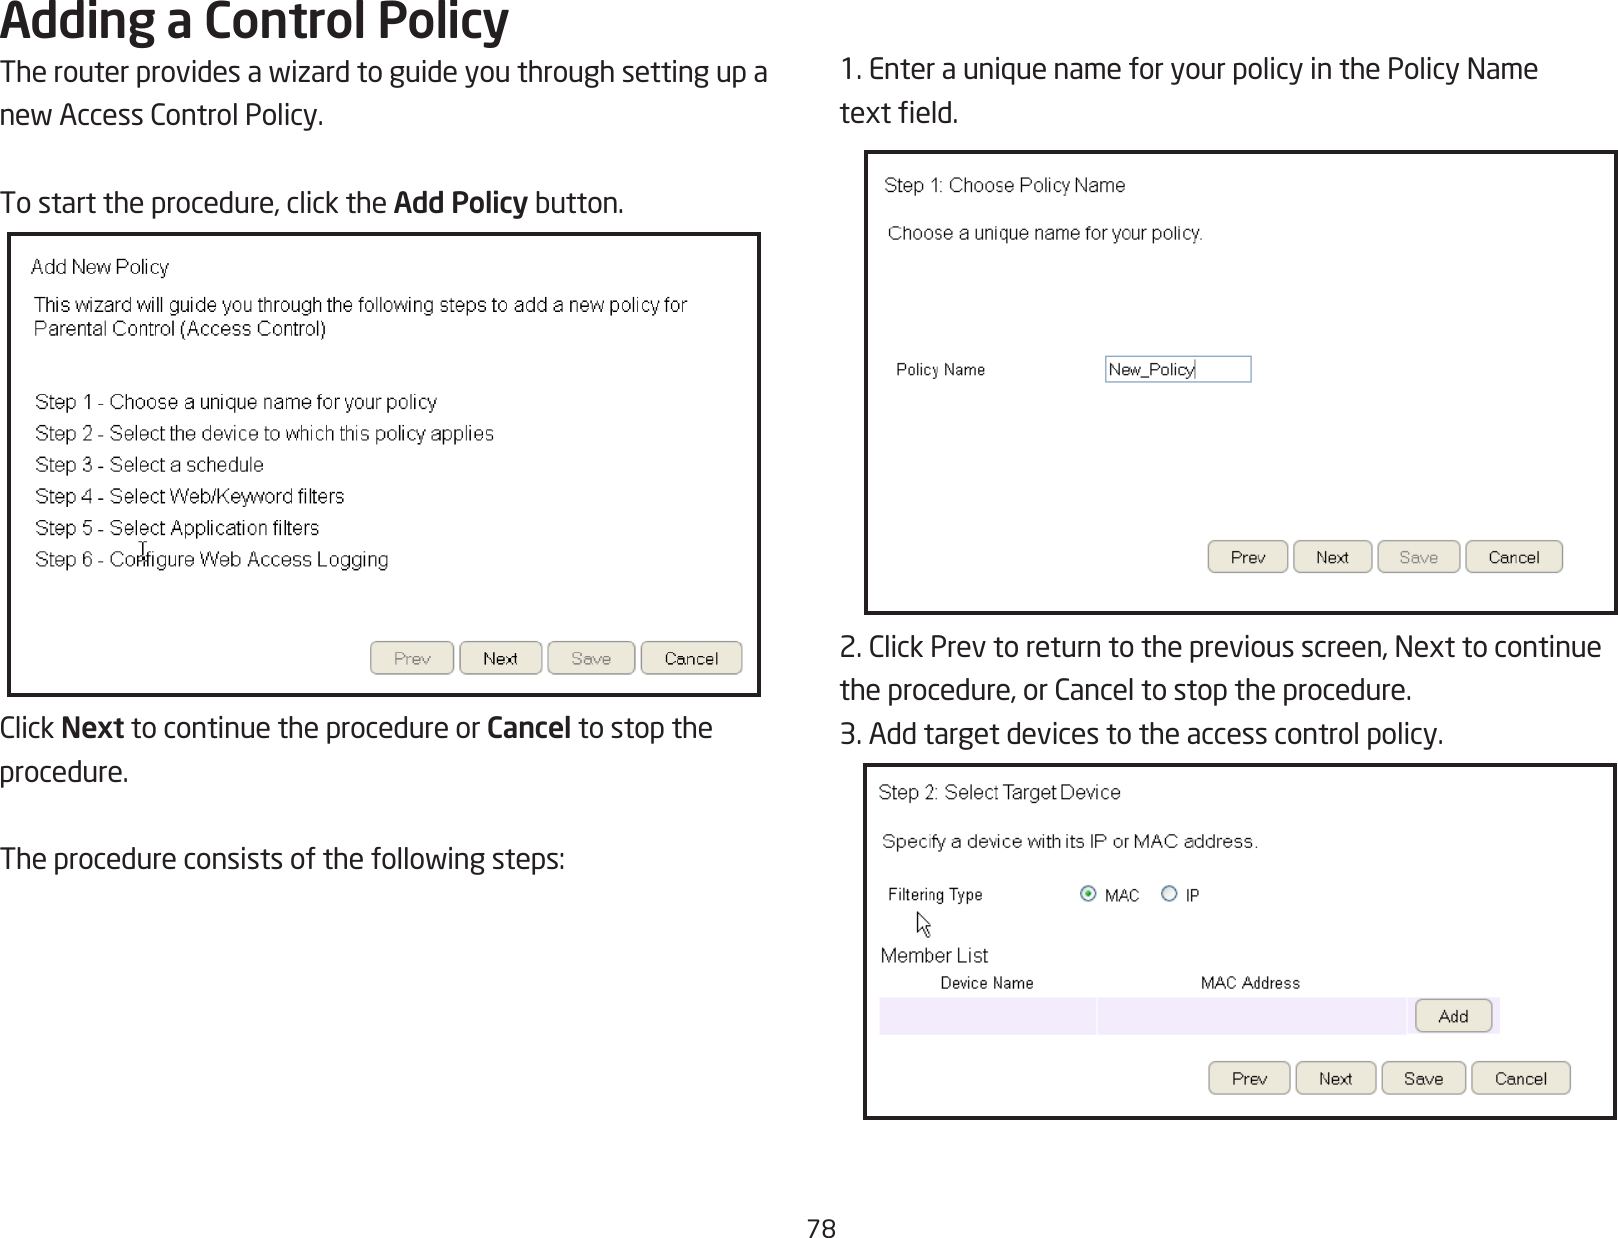 78Adding a Control PolicyTherouterprovidesawizardtoguideyouthroughsettingupanewAccessControlPolicy.To start the procedure, click the Add Policybutton.ClickNext to continue the procedure or Cancel to stop theprocedure.Theprocedureconsistsofthefollowingsteps:1.EnterauniquenameforyourpolicyinthePolicyNametexteld.2.ClickPrevtoreturntothepreviousscreen,Nexttocontinuetheprocedure,orCanceltostoptheprocedure.3. Add target devices to the access control policy.